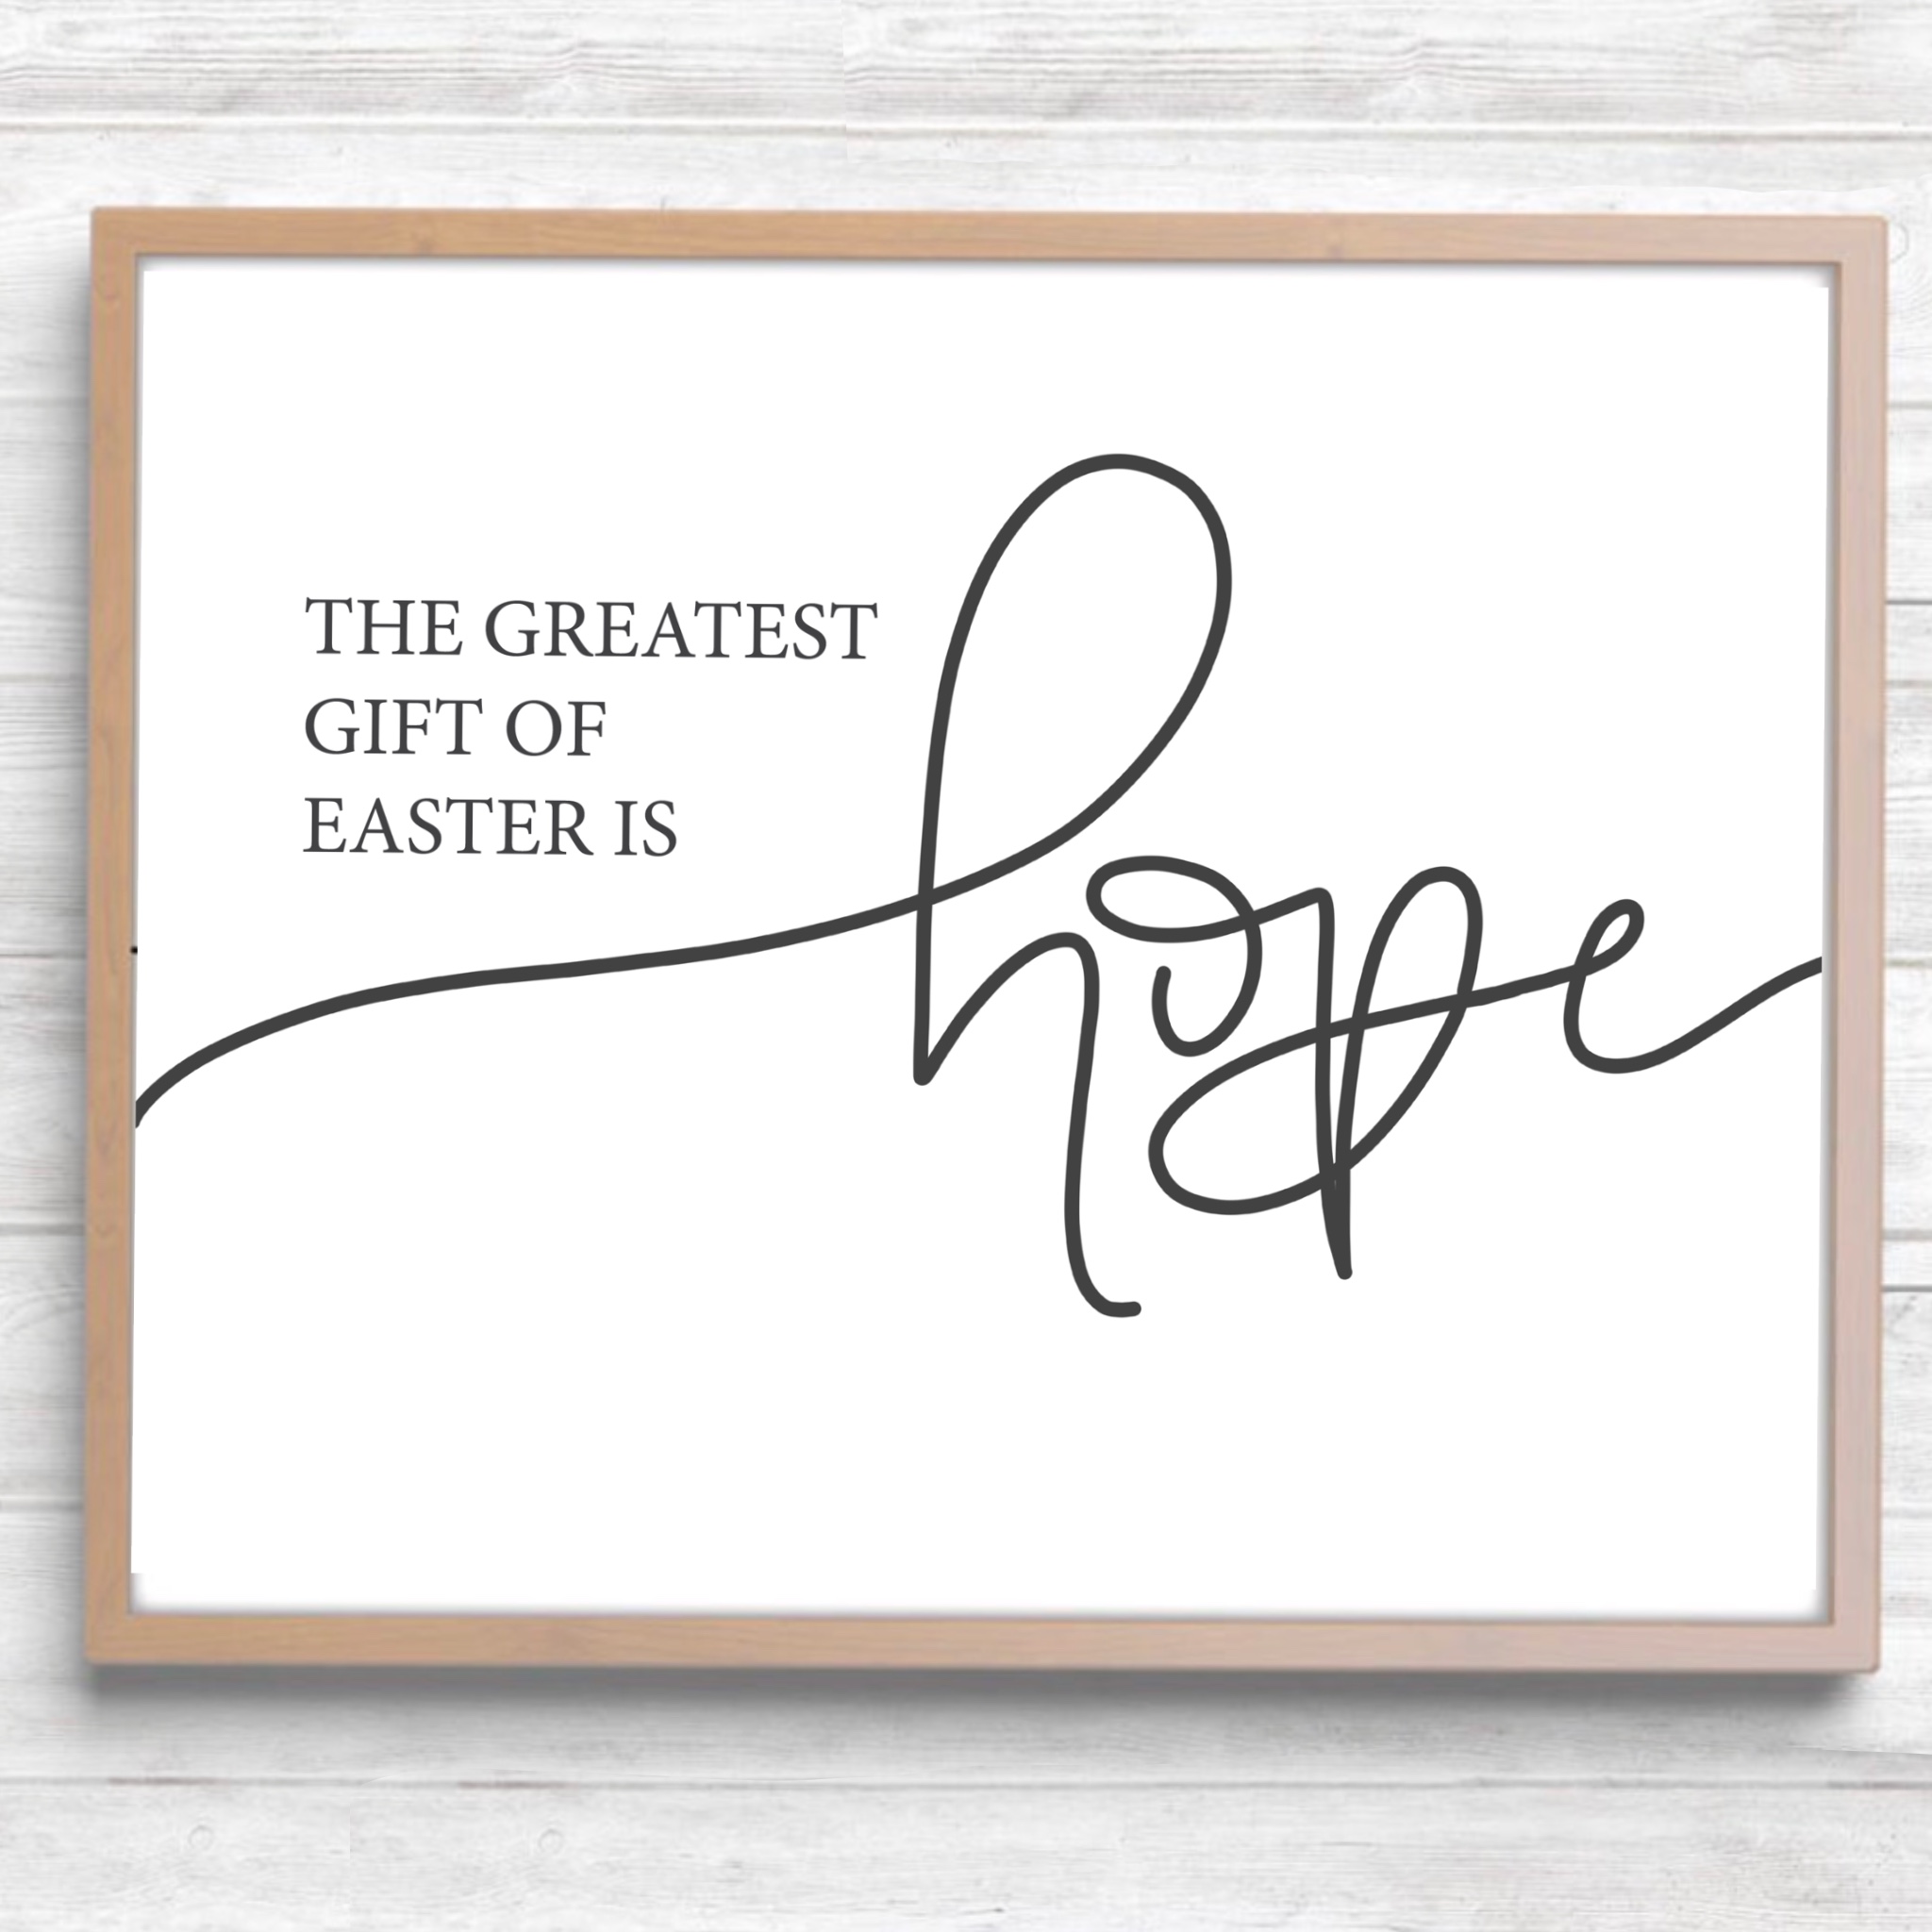 Framed Image "The Greatest Gift Of Easter Is Hope"